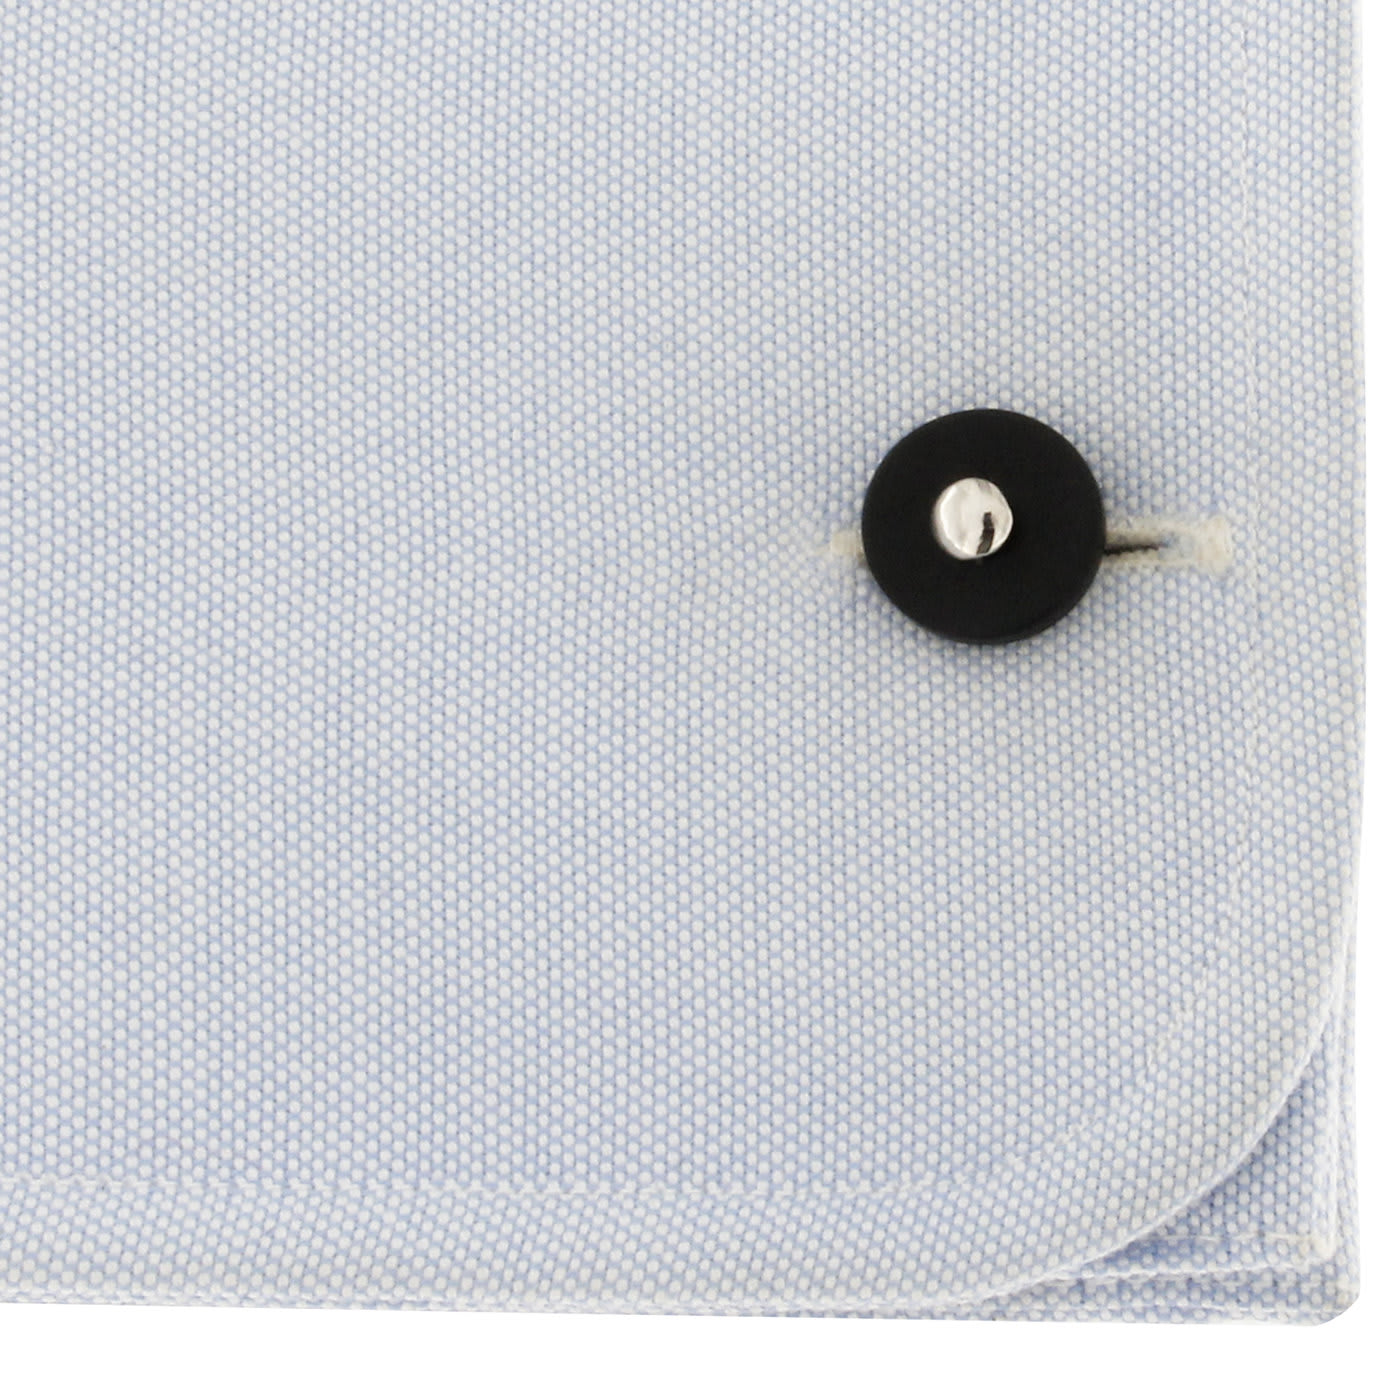 Onyx Rock Crystal and White Gold Button Cufflinks - Jona